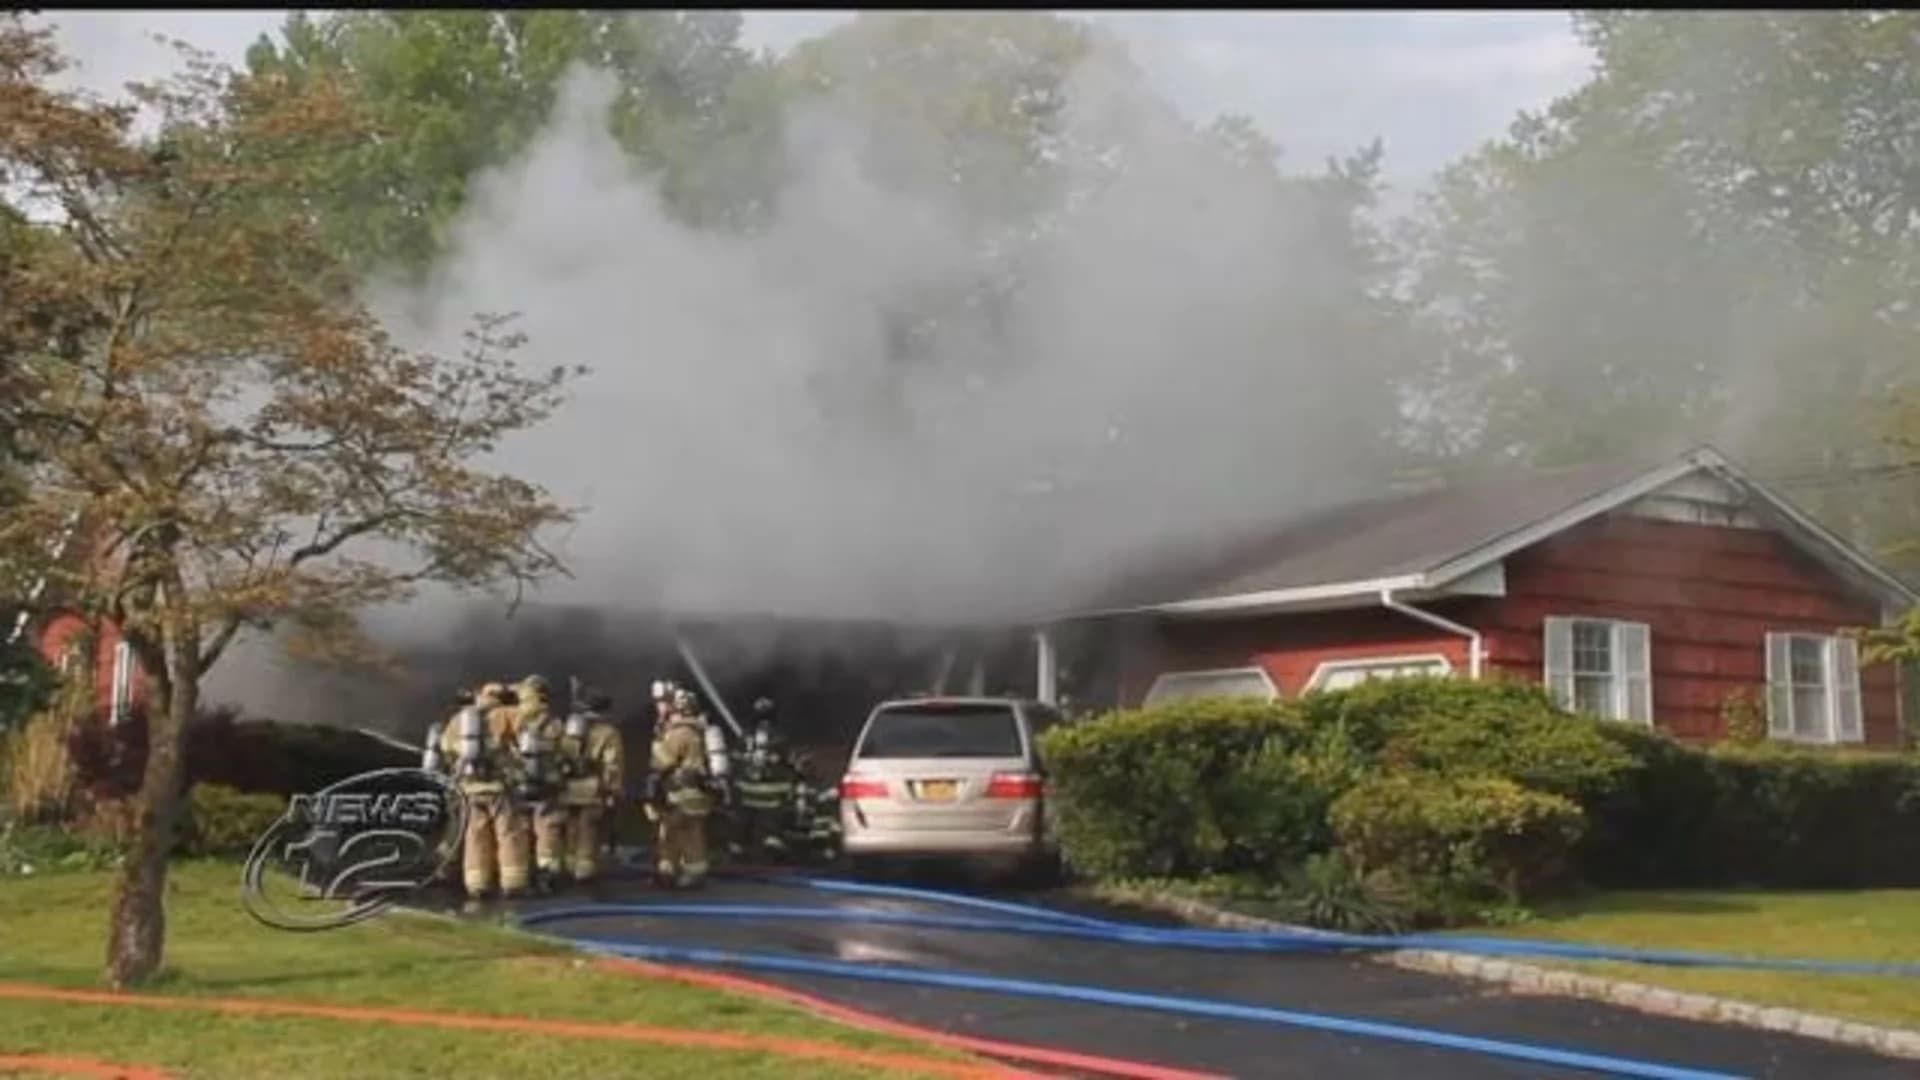 4 injured after fire rips through home in Smithtown